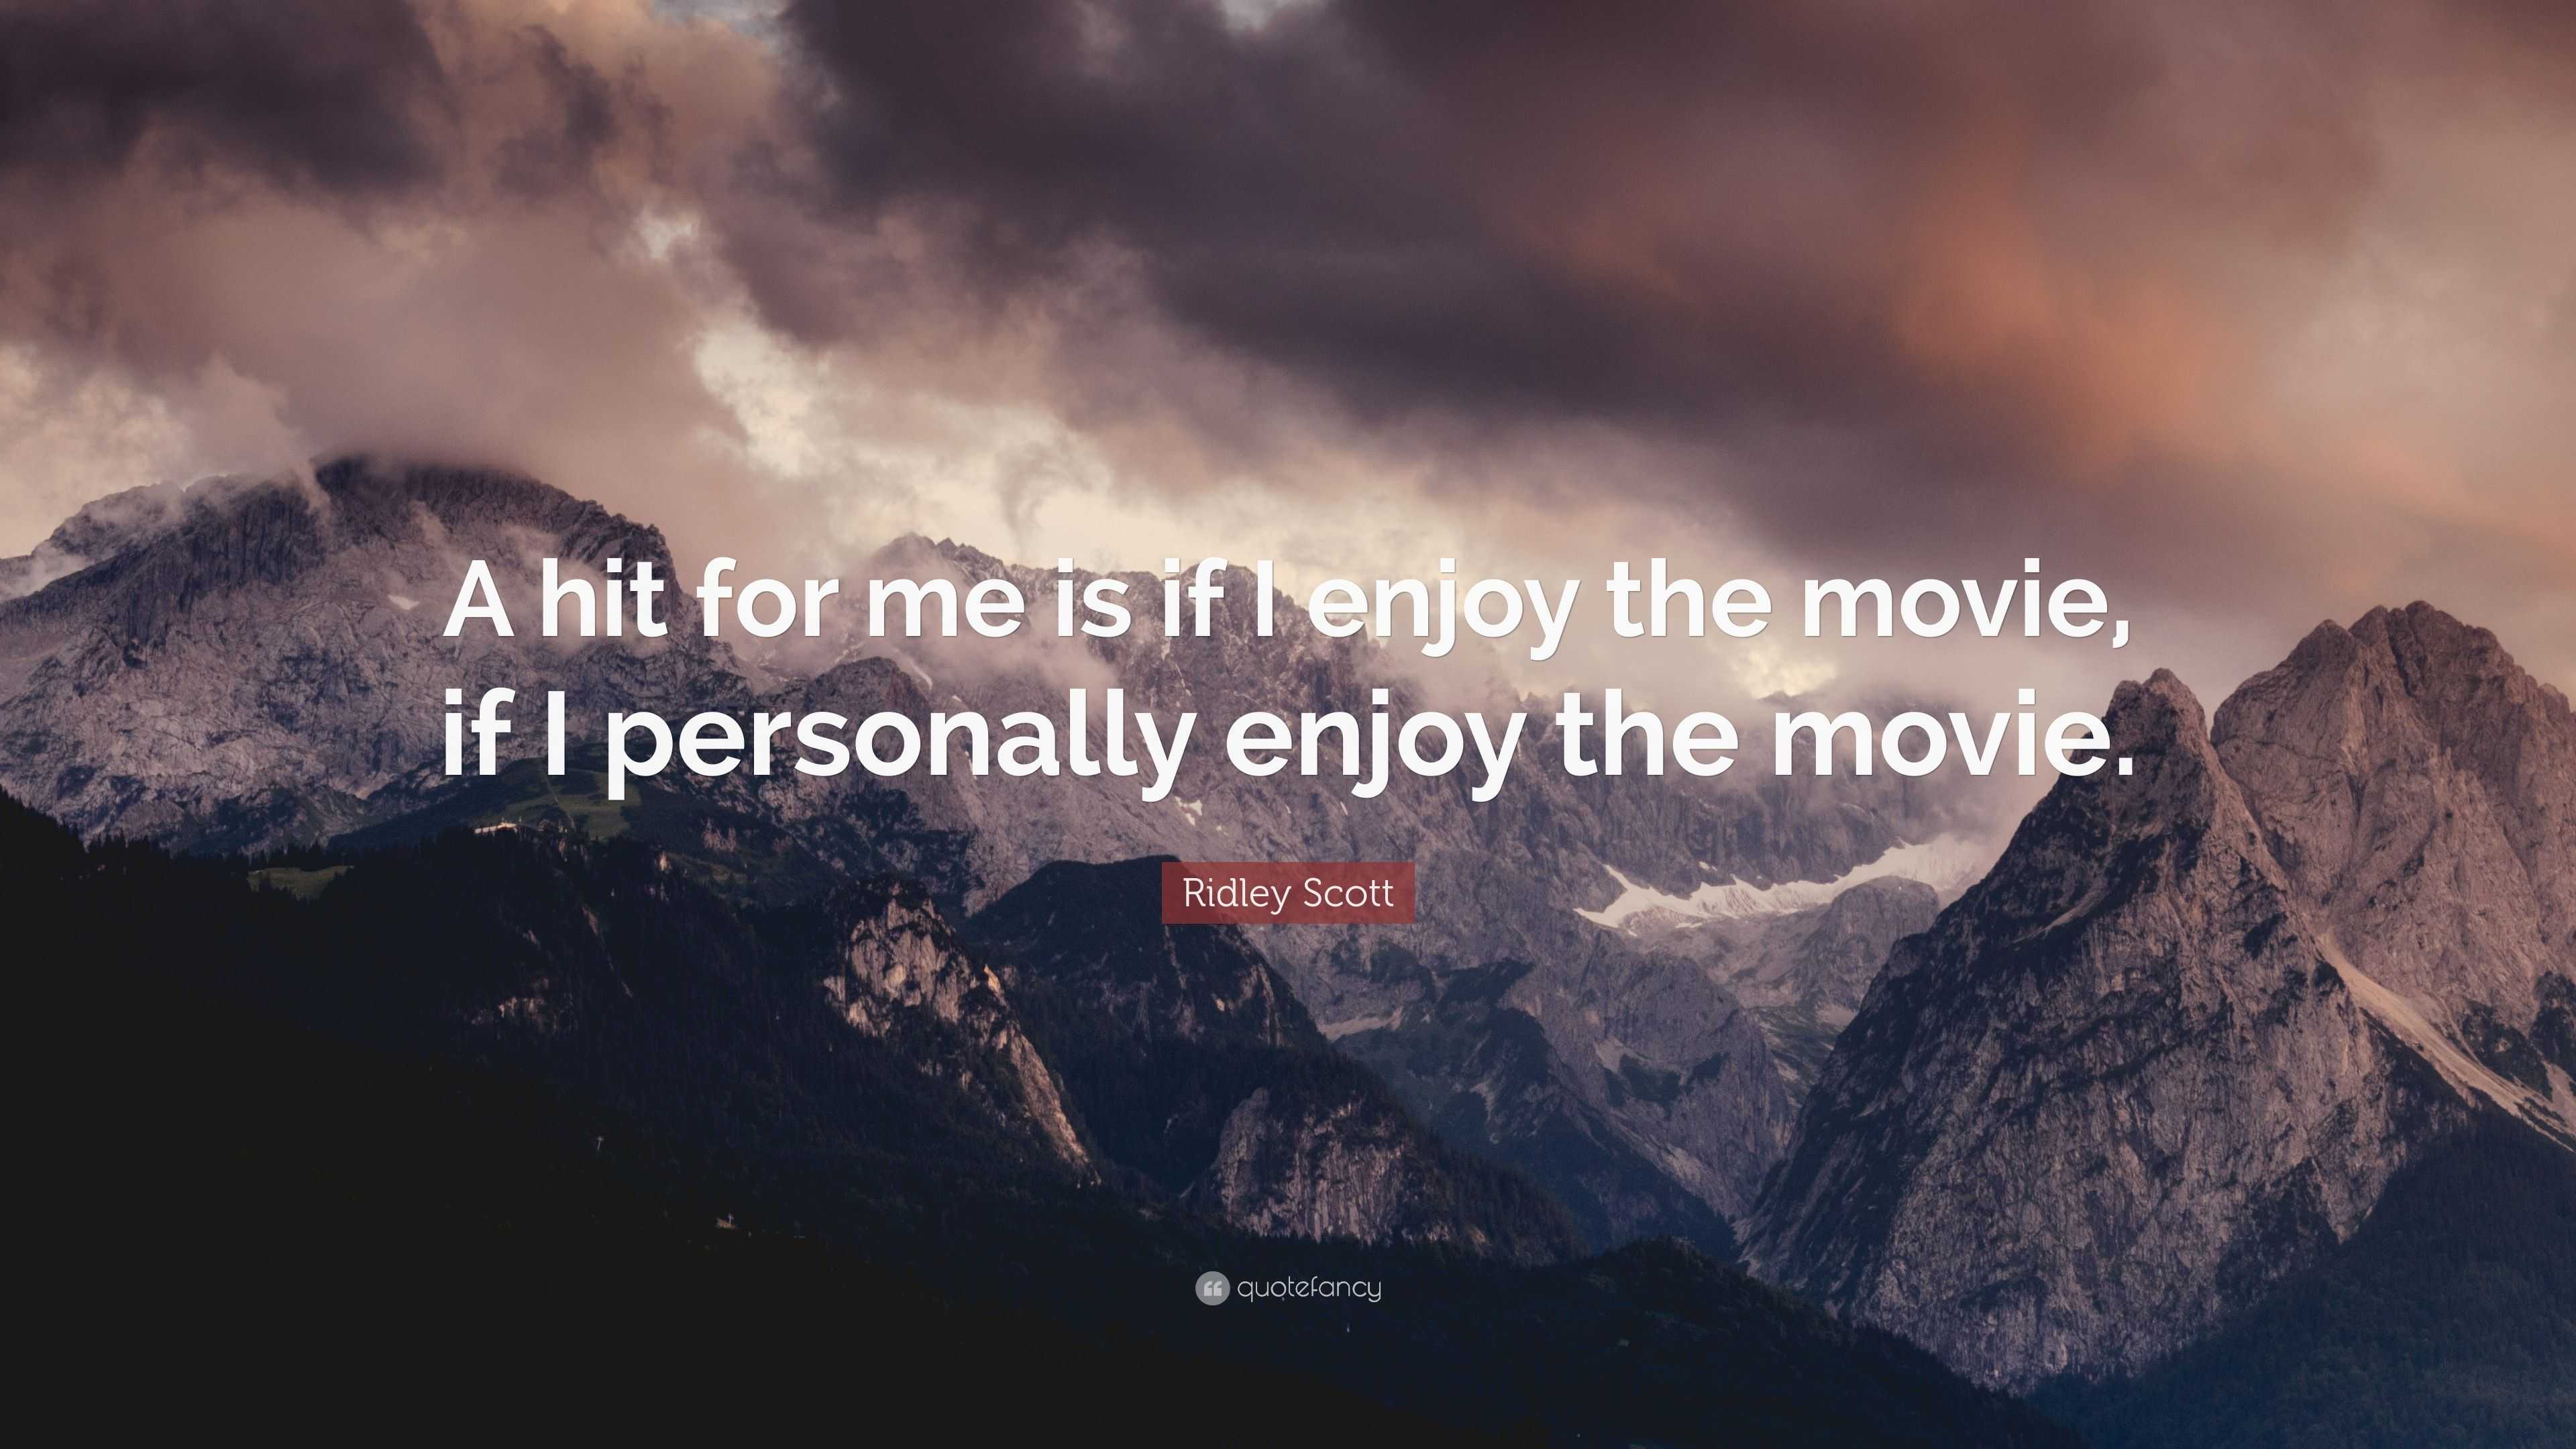 Here enjoy #iFilm's quote pick of the day.